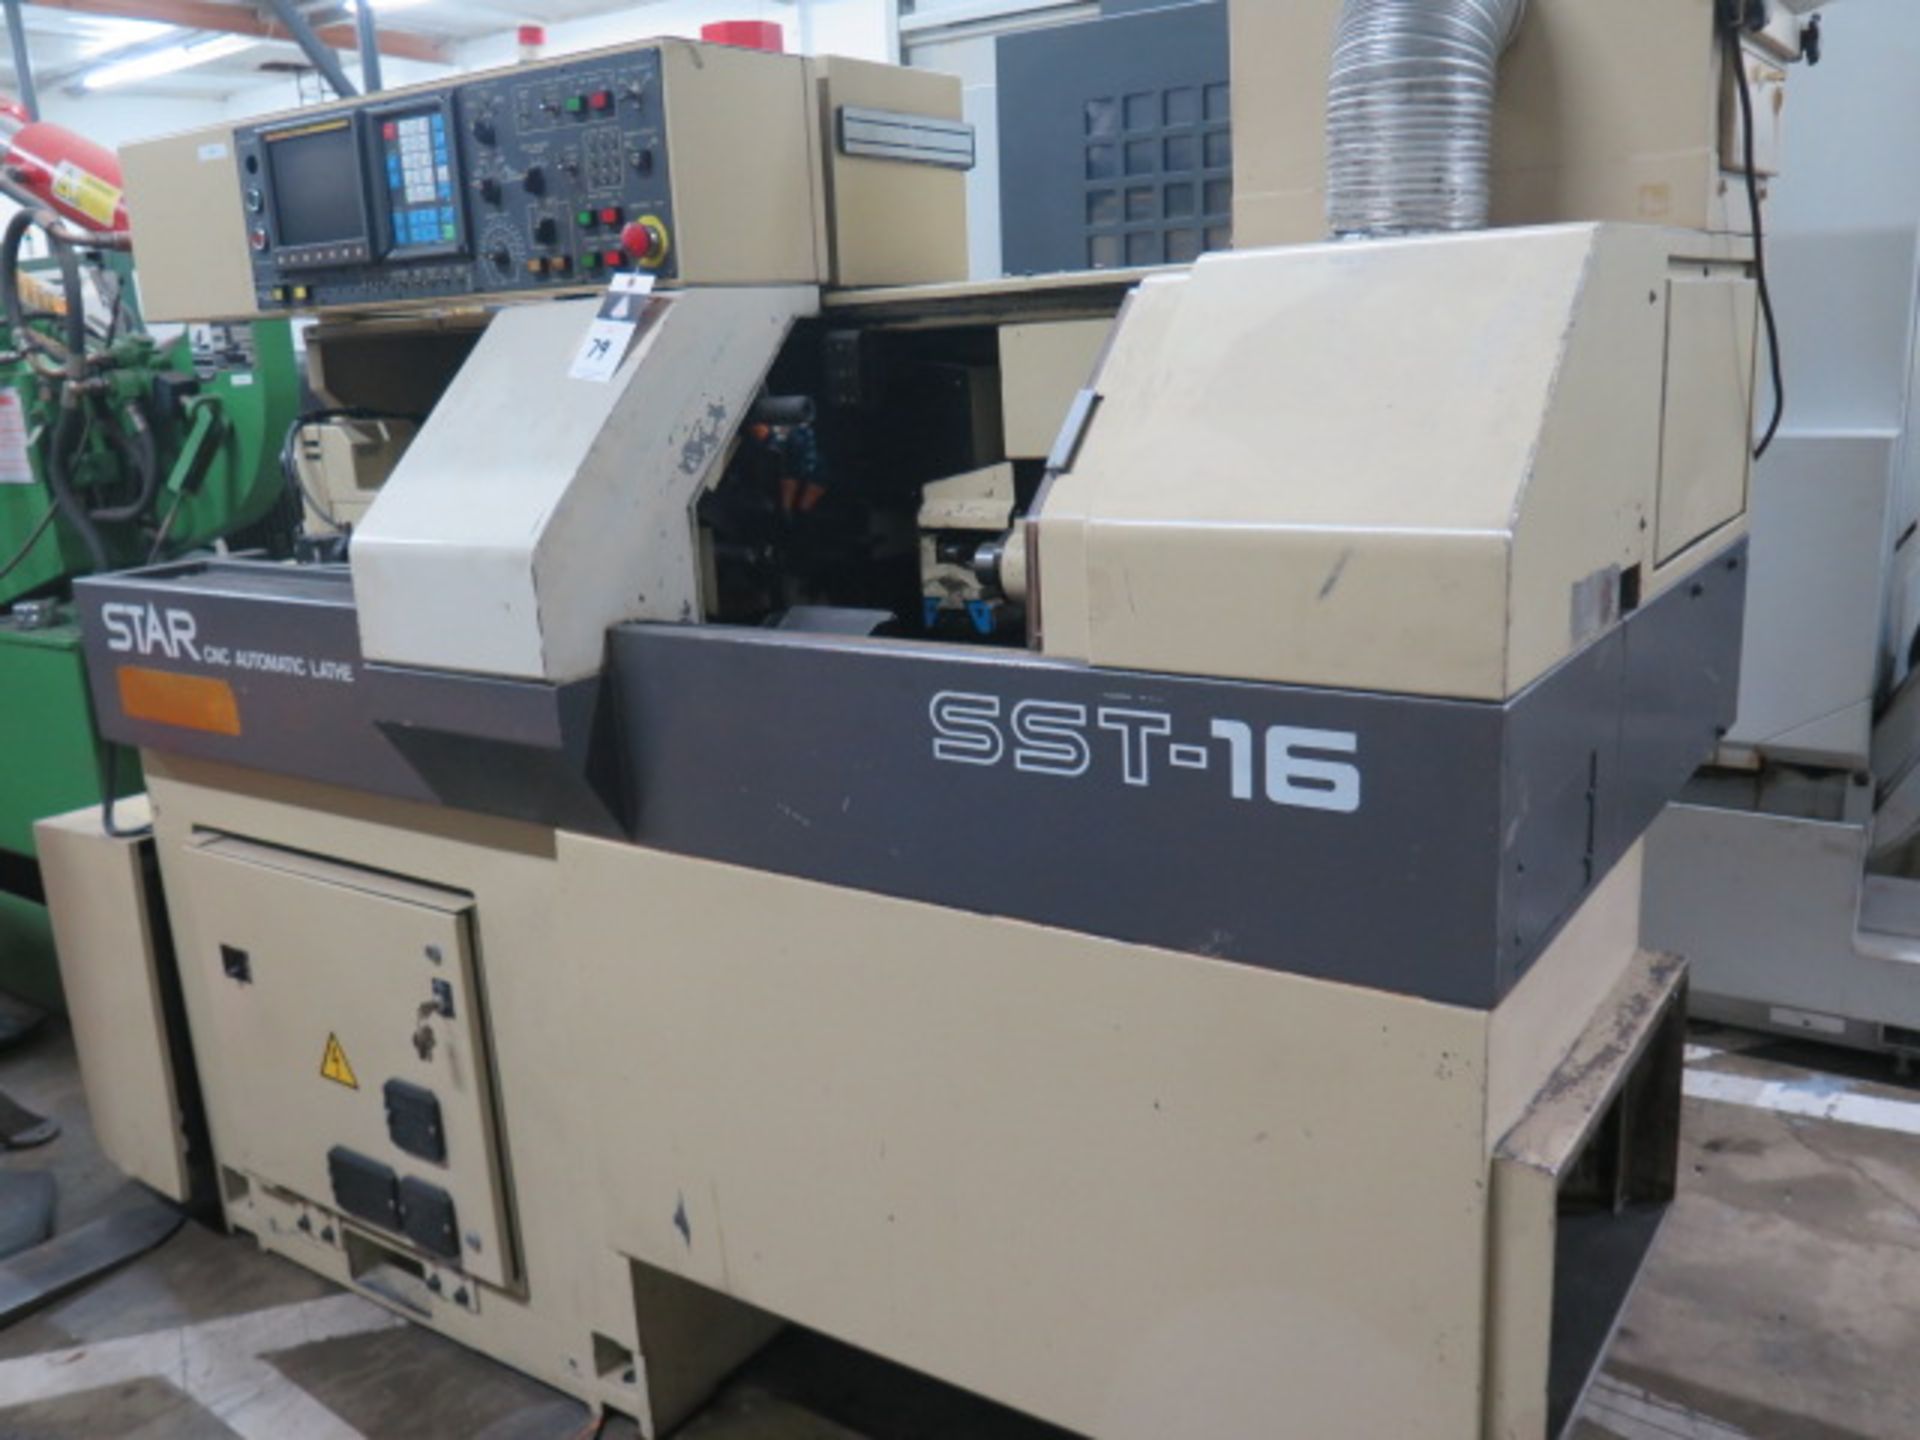 Star SST-16 CNC Screw Machine s/n 010362 w/ Fanuc Series 0-TT Controls, Sub Spindle, SOLD AS IS - Image 2 of 19